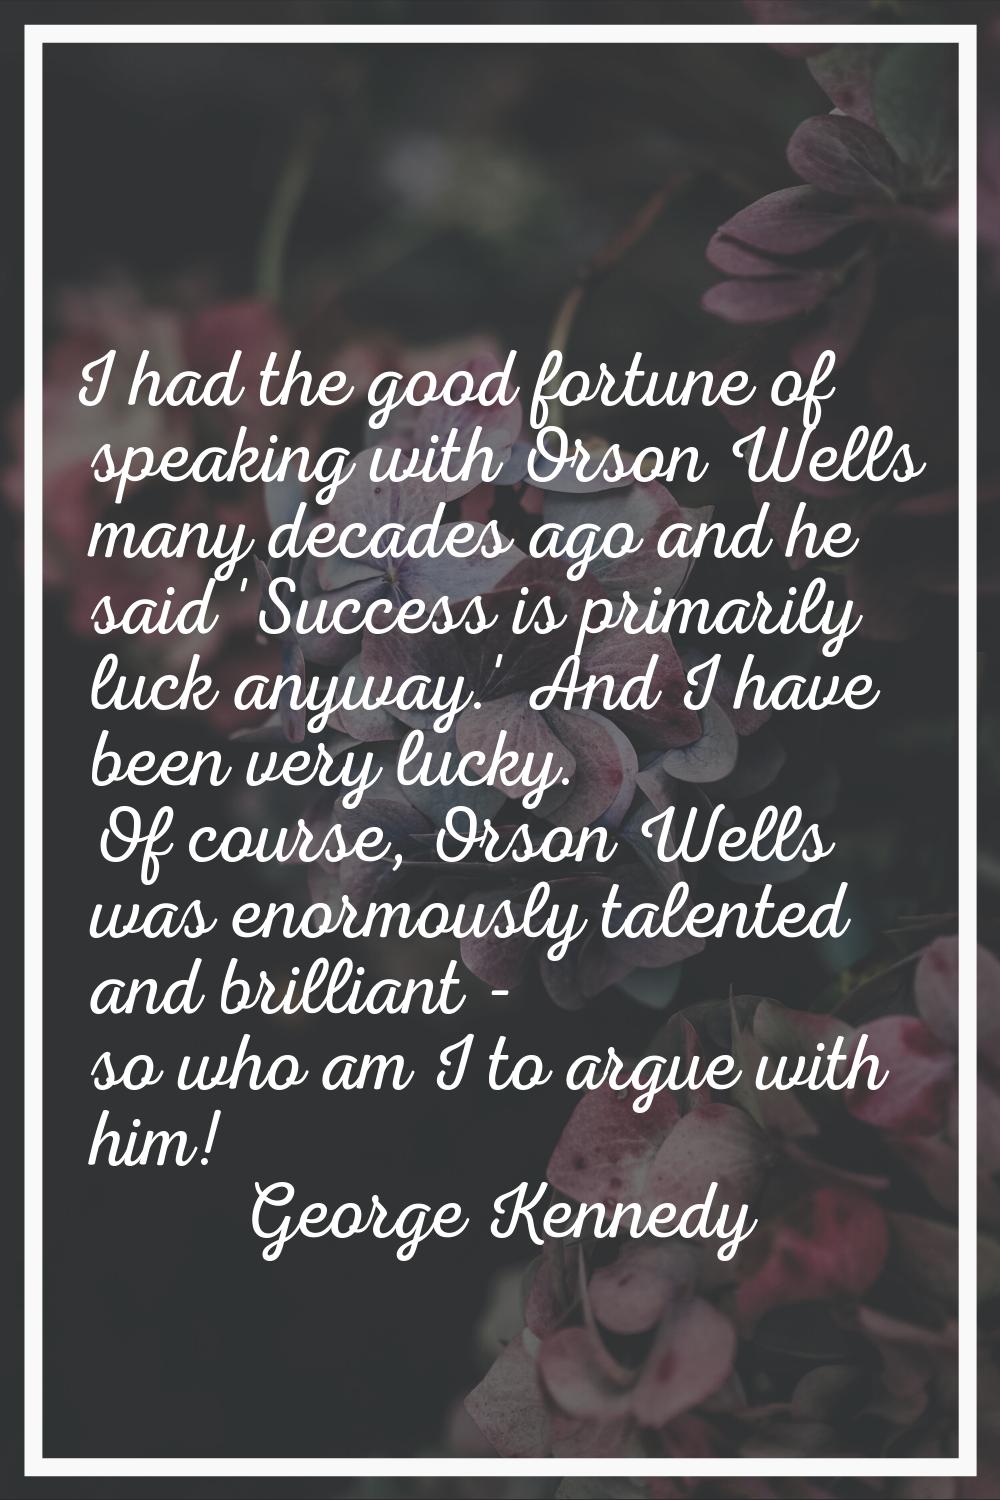 I had the good fortune of speaking with Orson Wells many decades ago and he said 'Success is primar